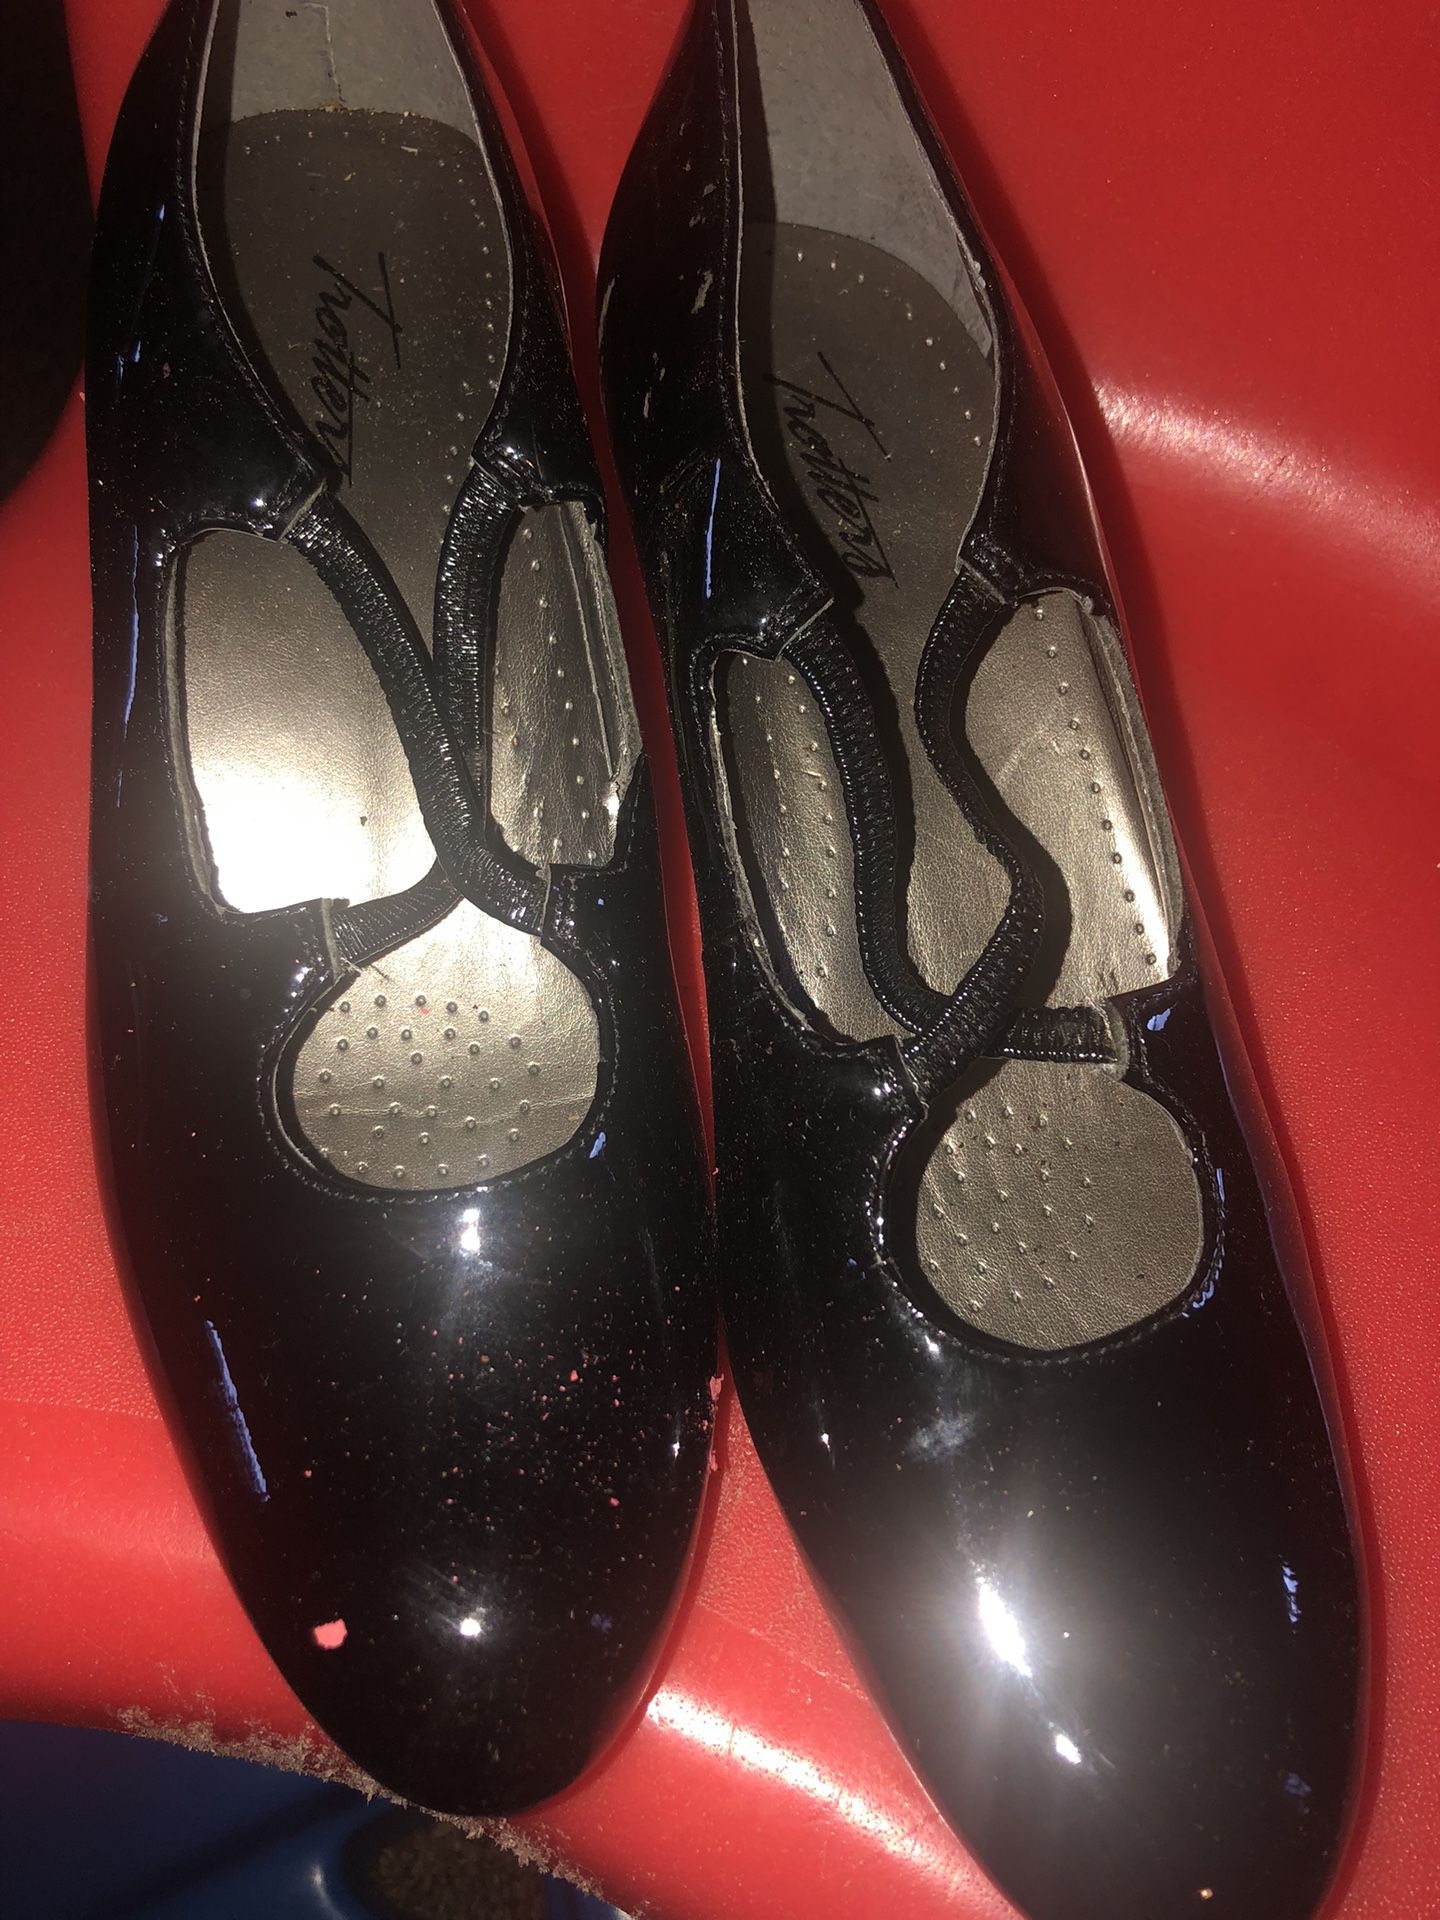 Trotters & Co Patent Leather Girls Dressy Heels Size 7 1/2M